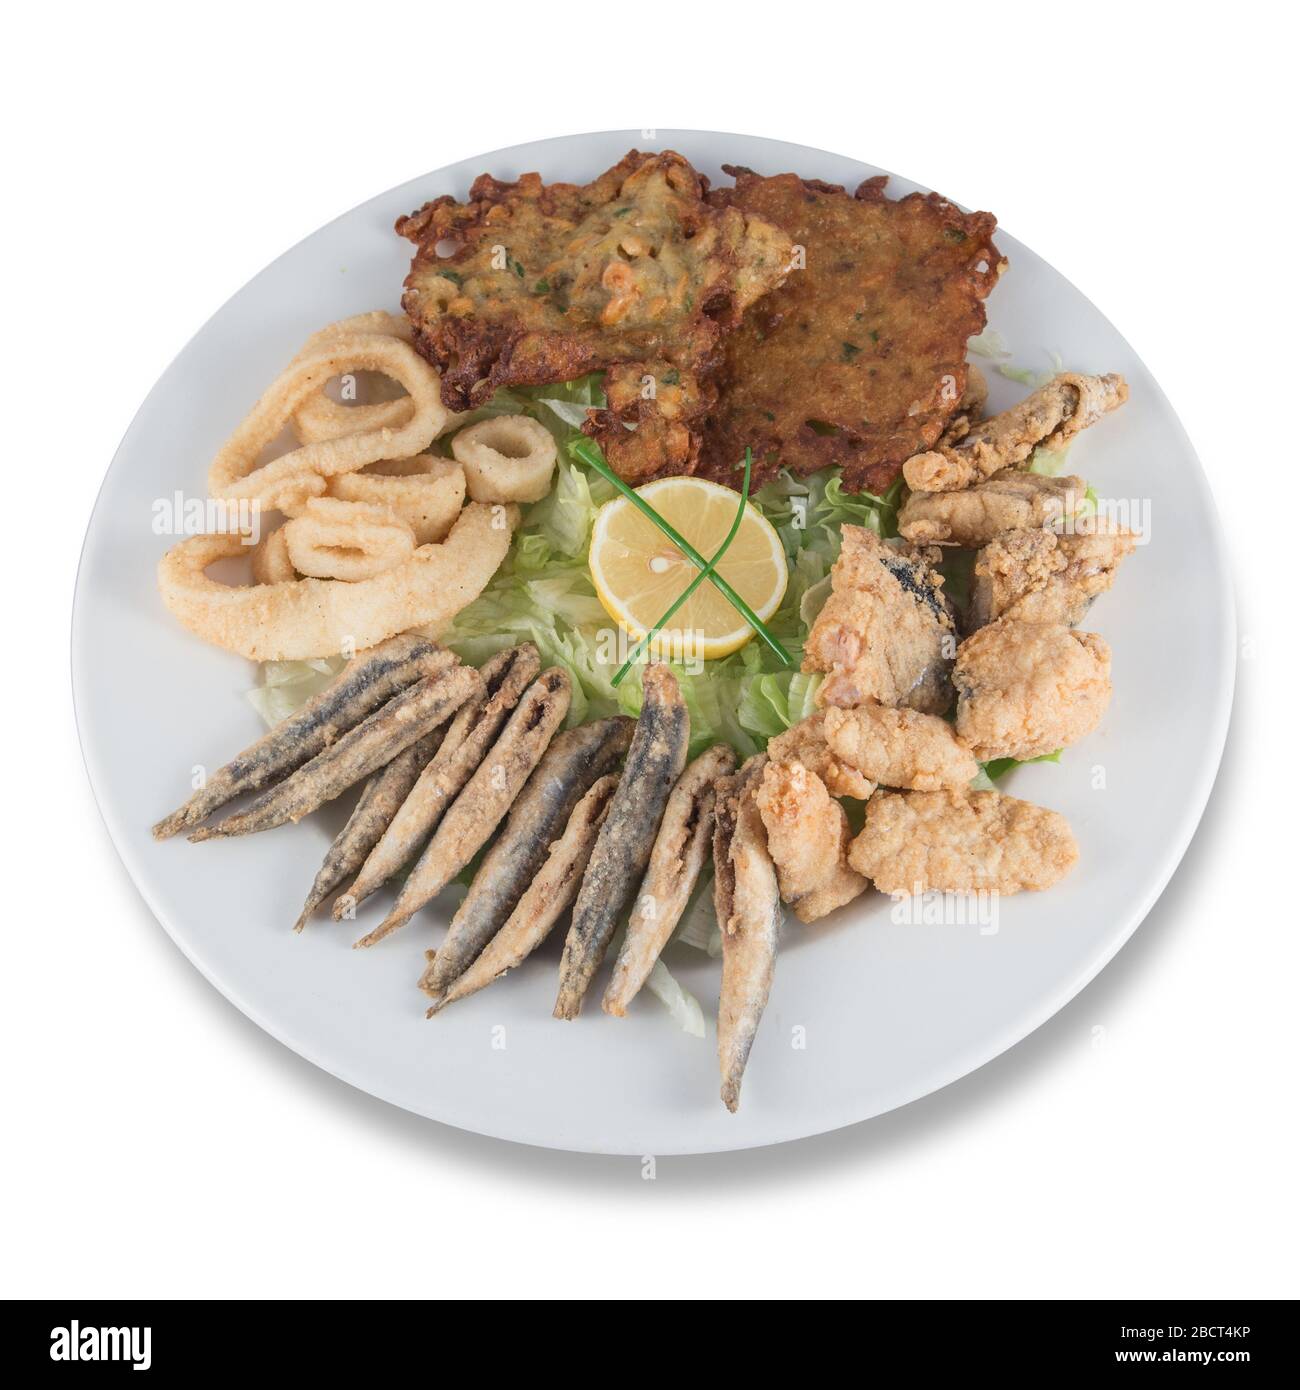 Fried fish dish with anchovies, squid, marinade and shrimp fritters. Stock Photo